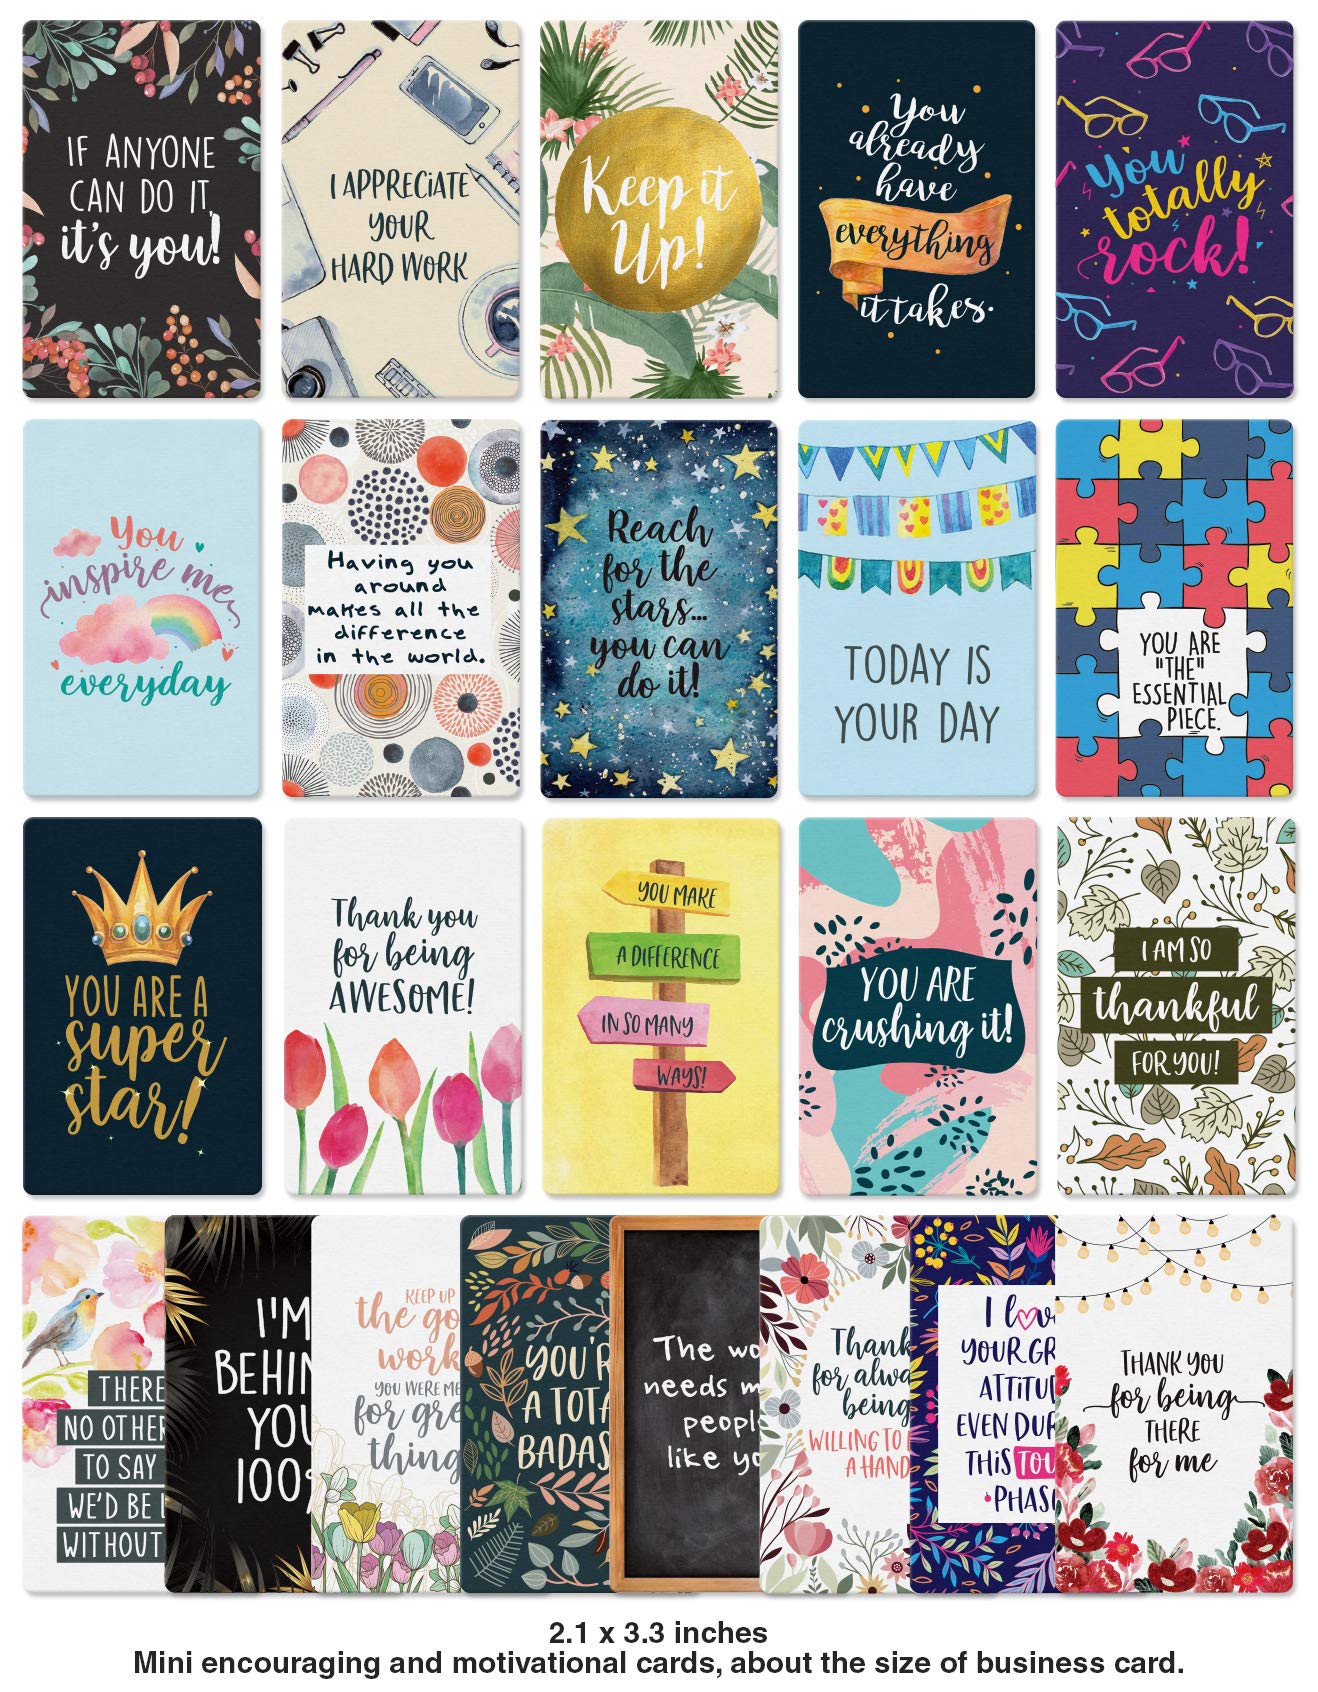 Dessie Motivational Cards - 63 Unique Inspirational Cards. Business Card Sized Encouragement Cards for Employees, Thinking of You Gifts, Appreciation Cards, Kindness Cards, Lunch Box Notes